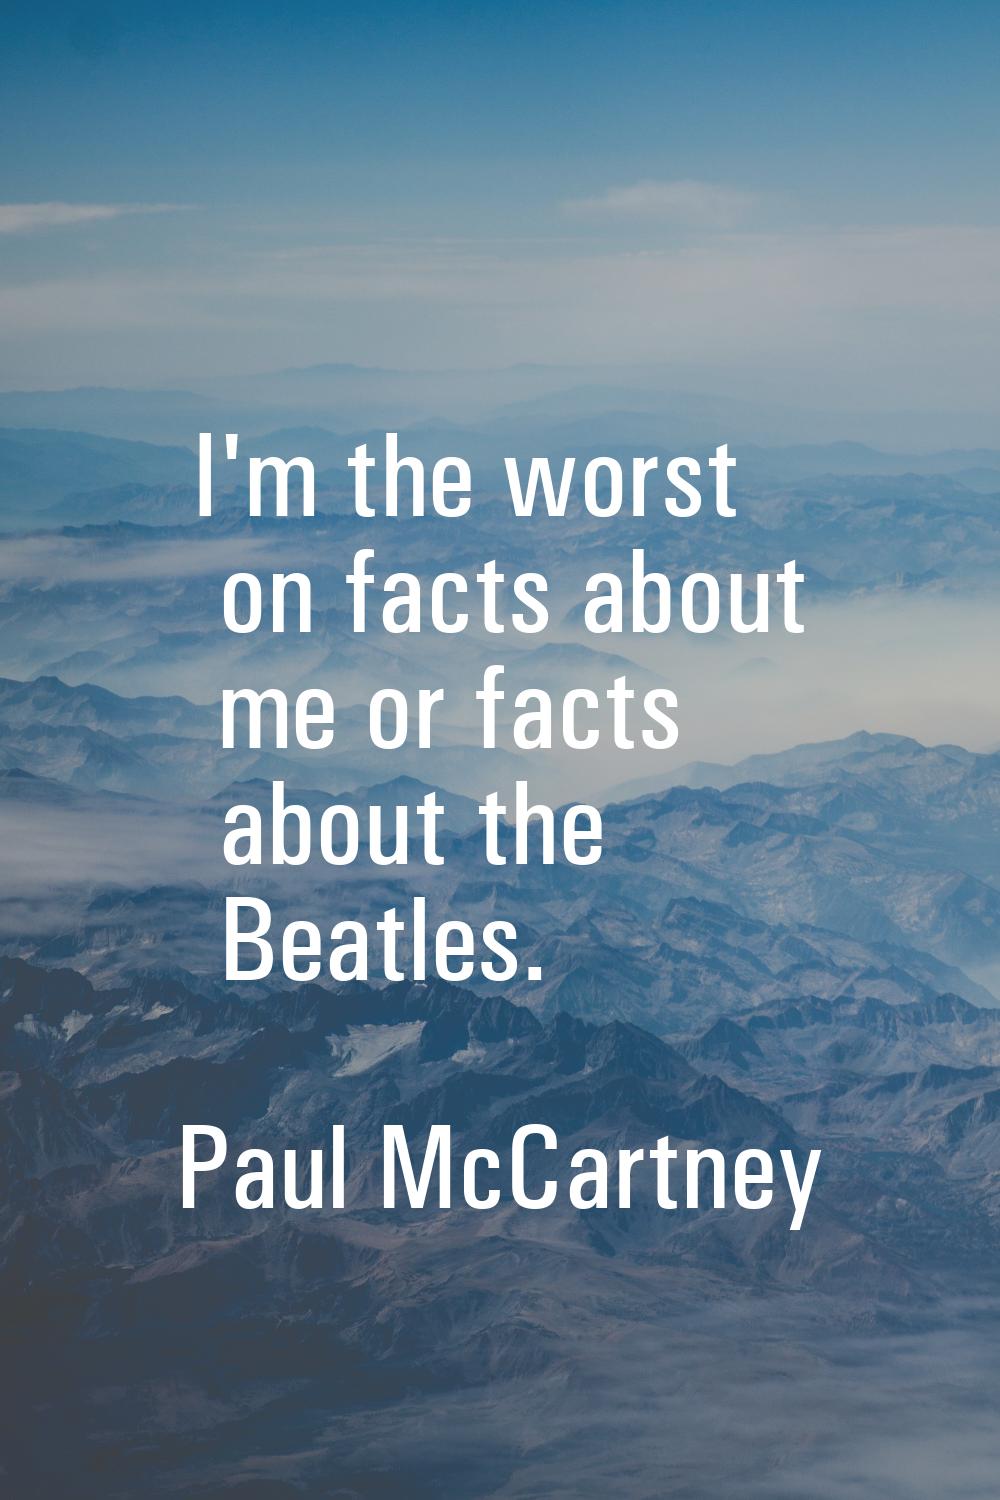 I'm the worst on facts about me or facts about the Beatles.